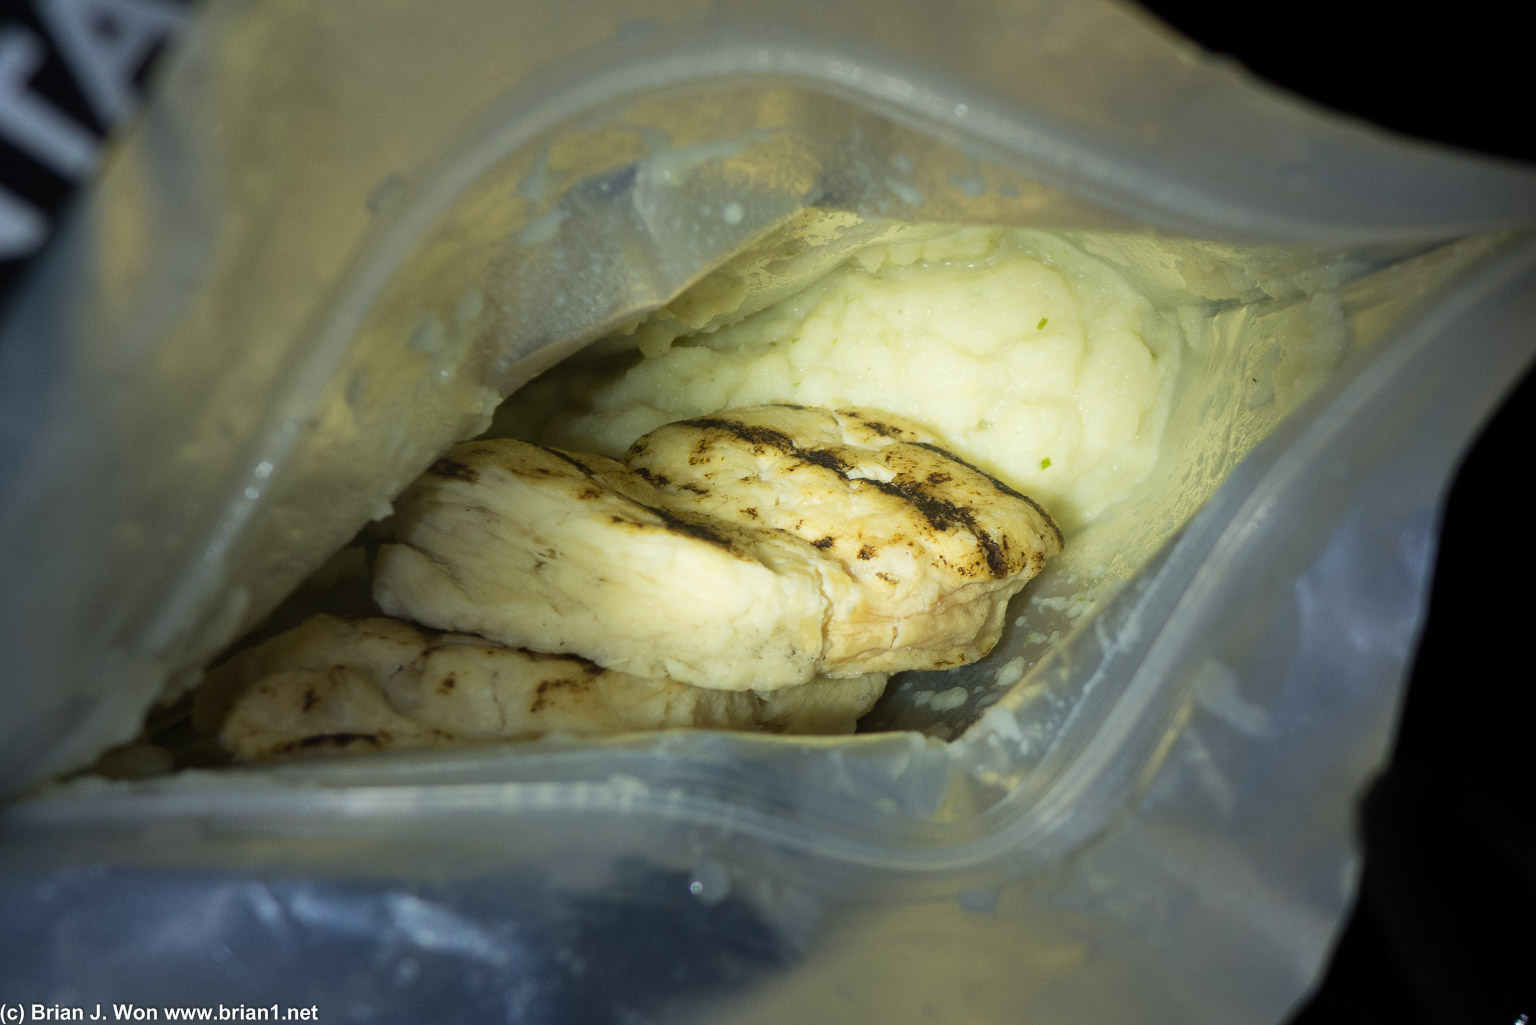 Rehydrated freeze-dried chicken and mashed potatoes.